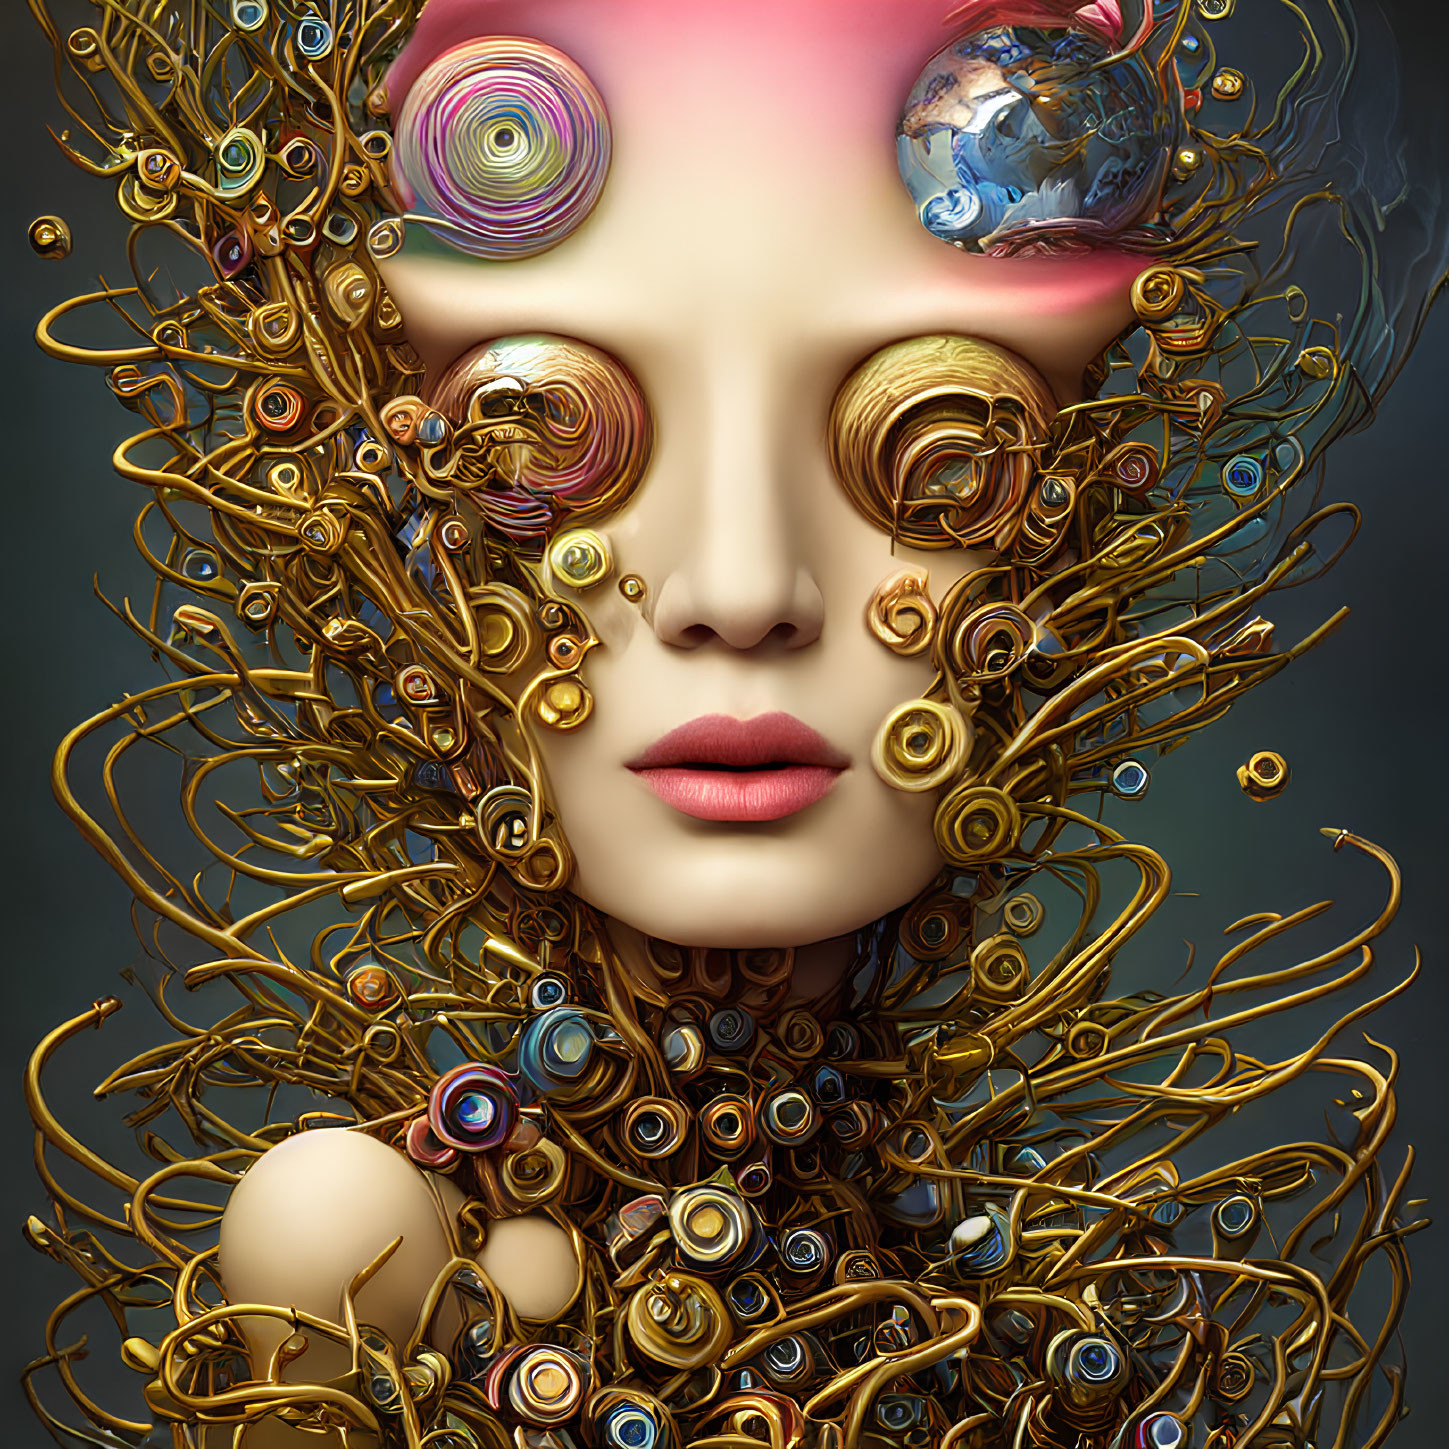 Surreal portrait featuring female figure with golden spiral hair and Earth-like sphere.